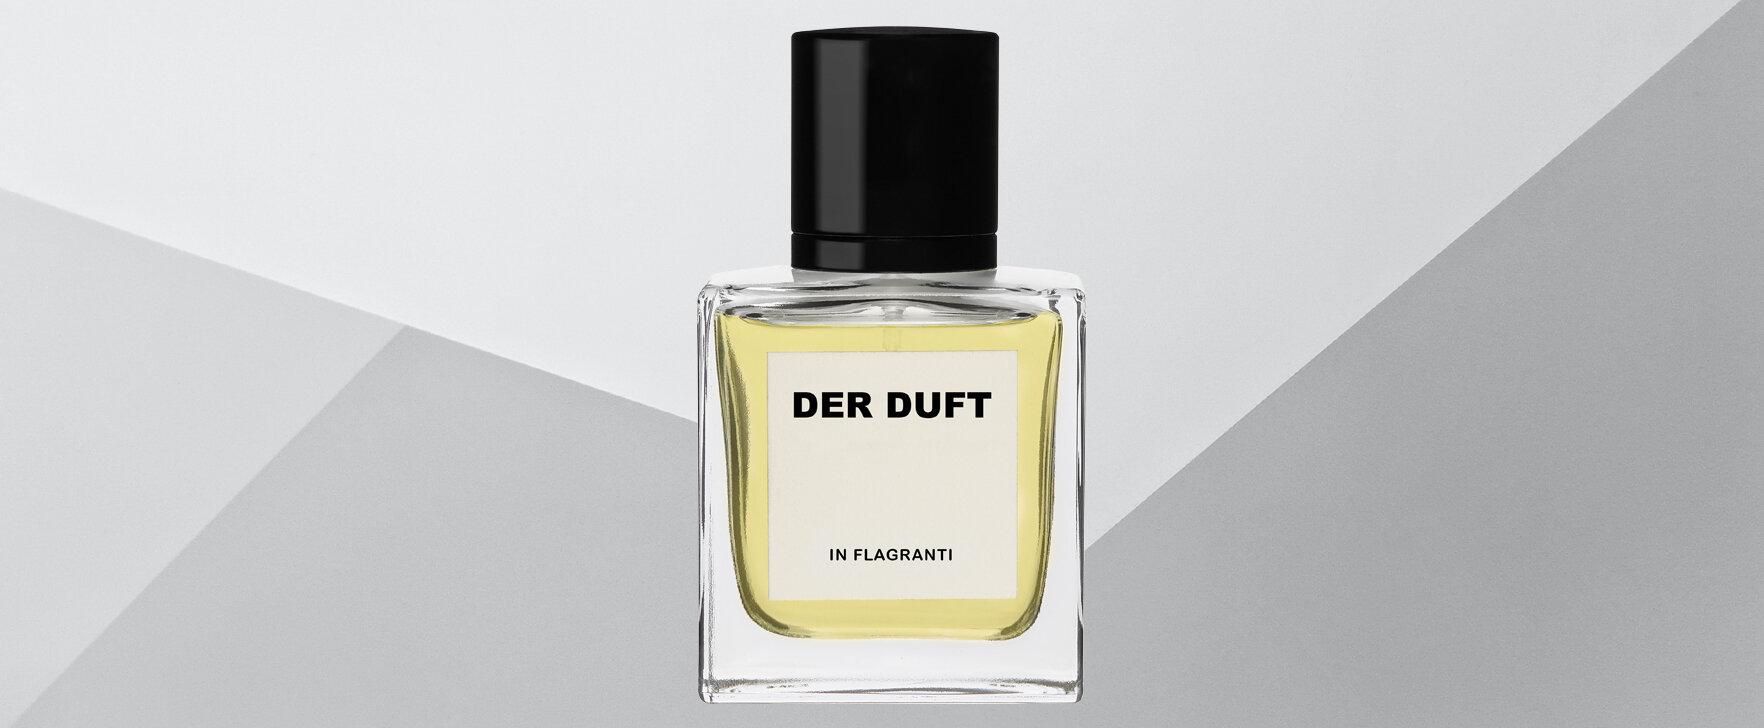 In Flagranti: The New Floral-Sweet Unisex Creation by Der Duft